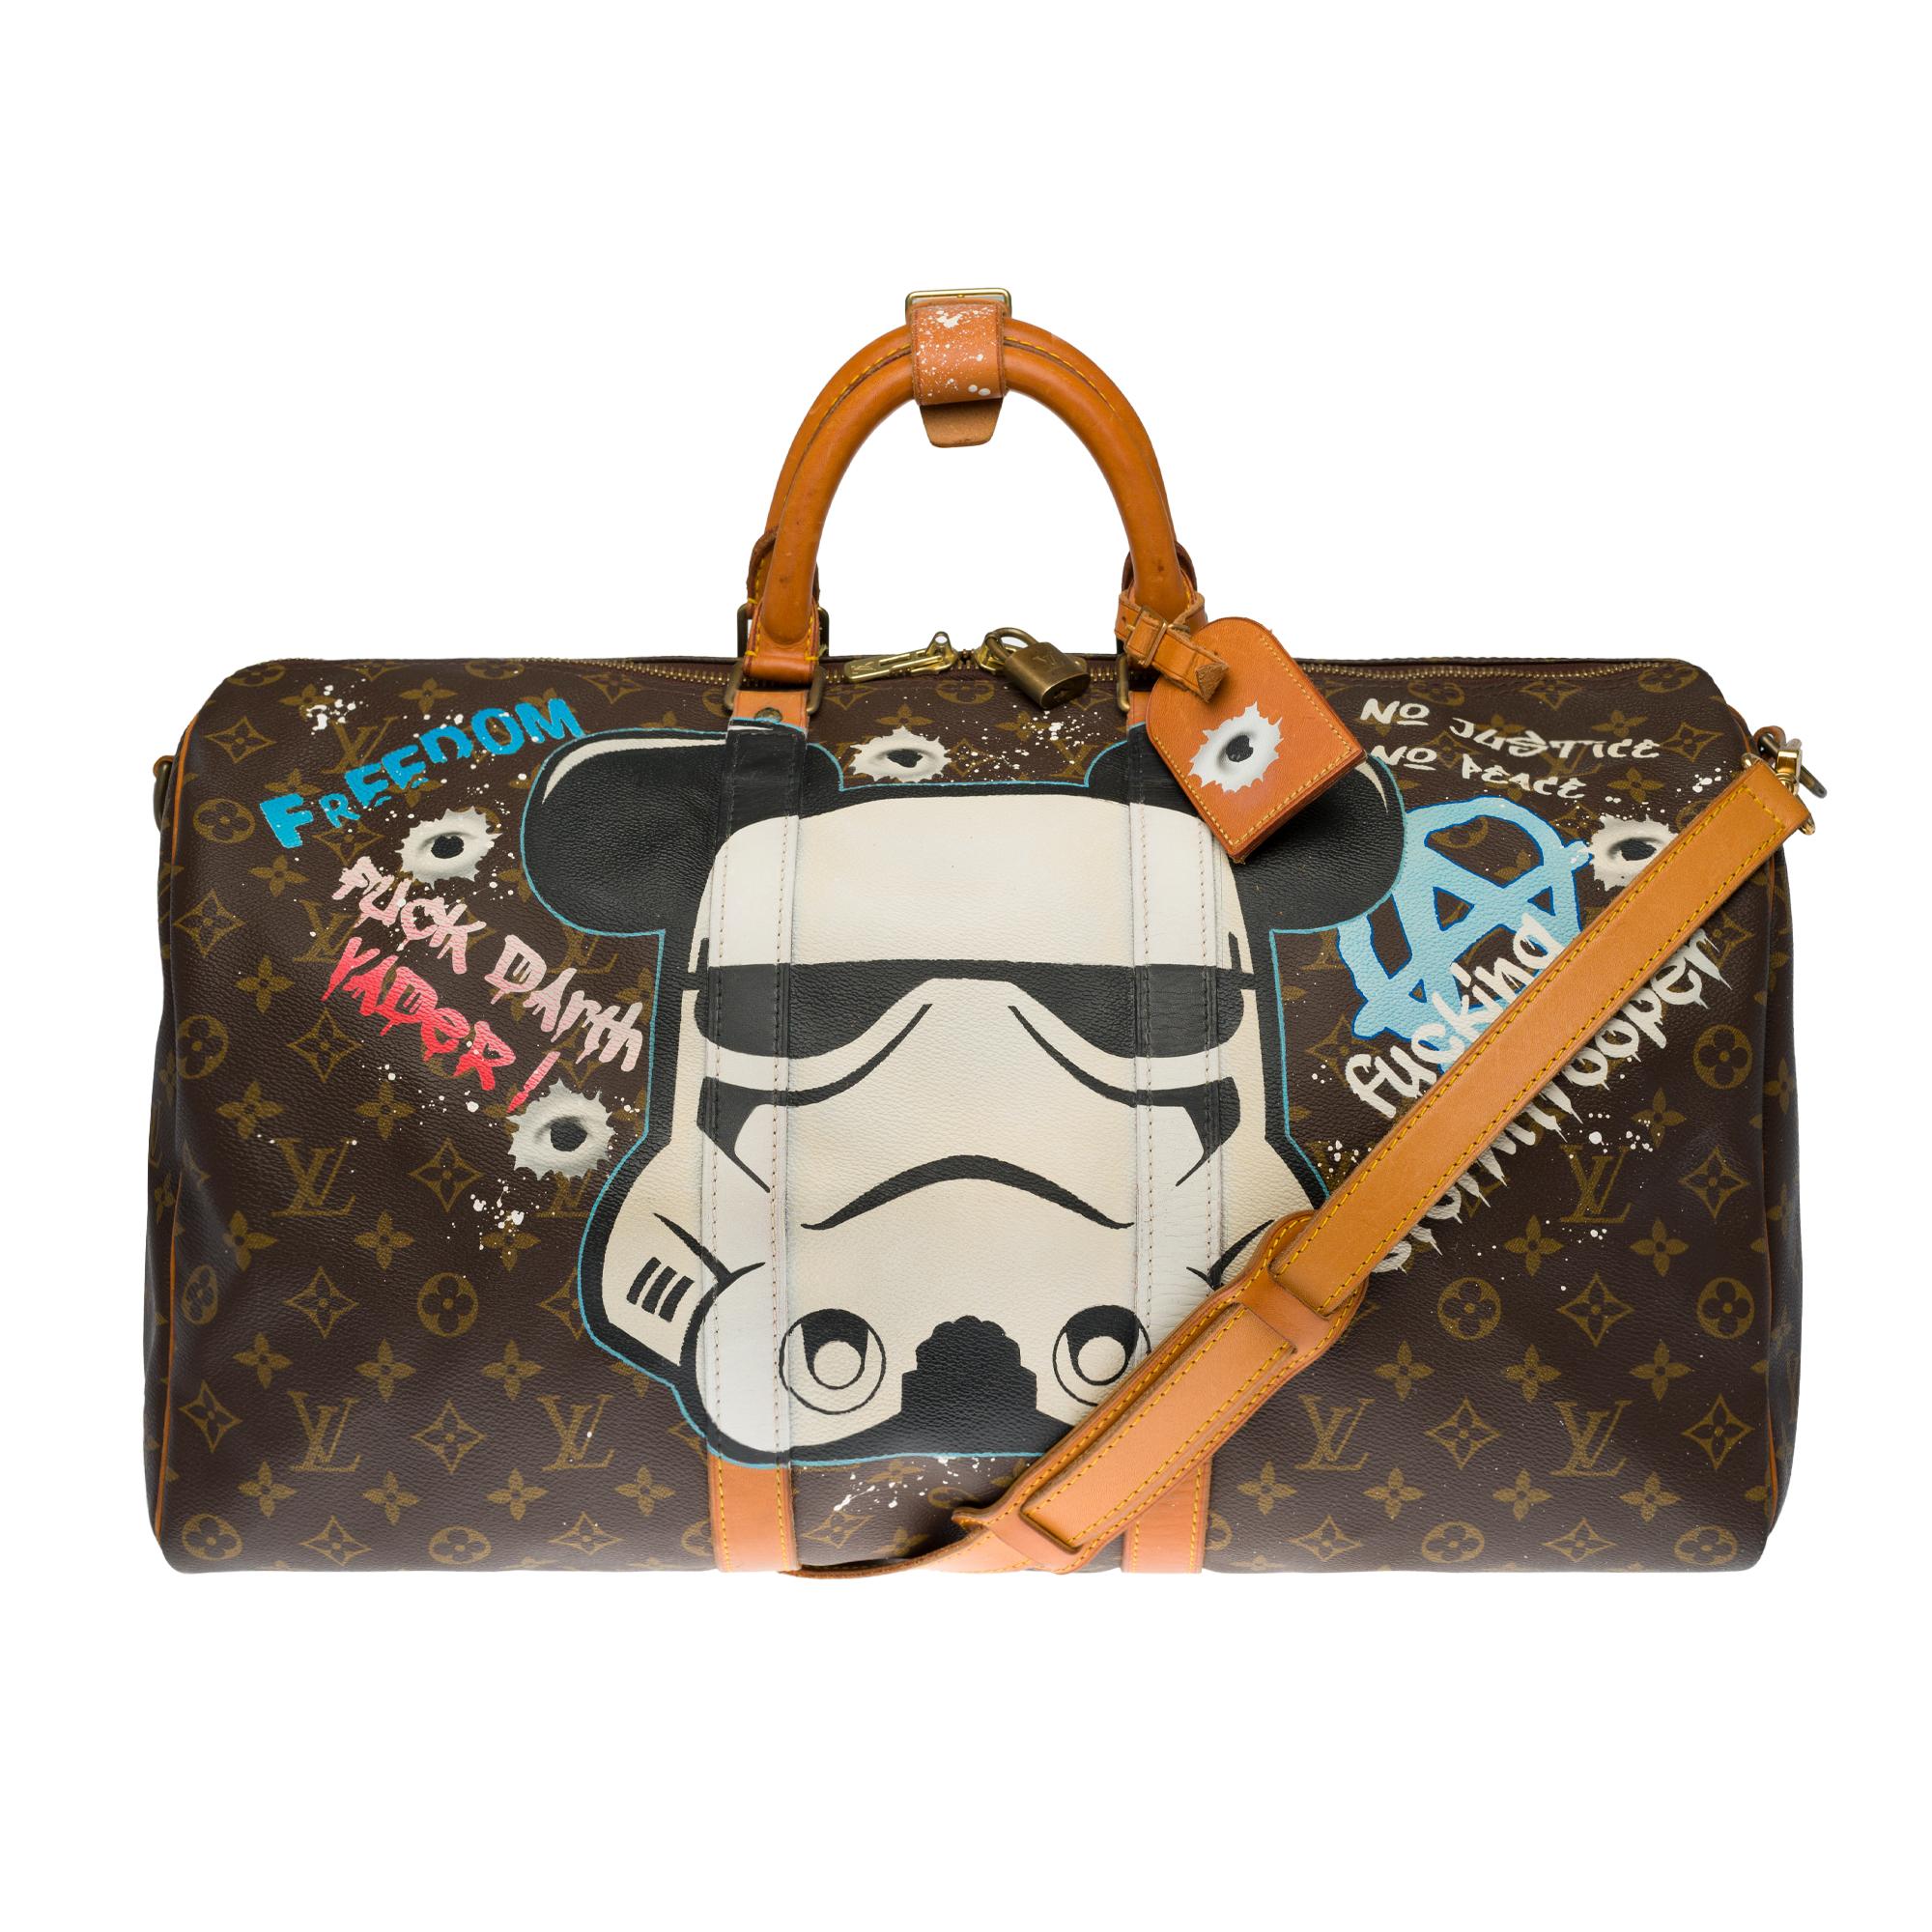 Exceptional Louis Vuitton Keepall travel bag 50 cm with shoulder strap in brown monogram canvas and customized natural leather 